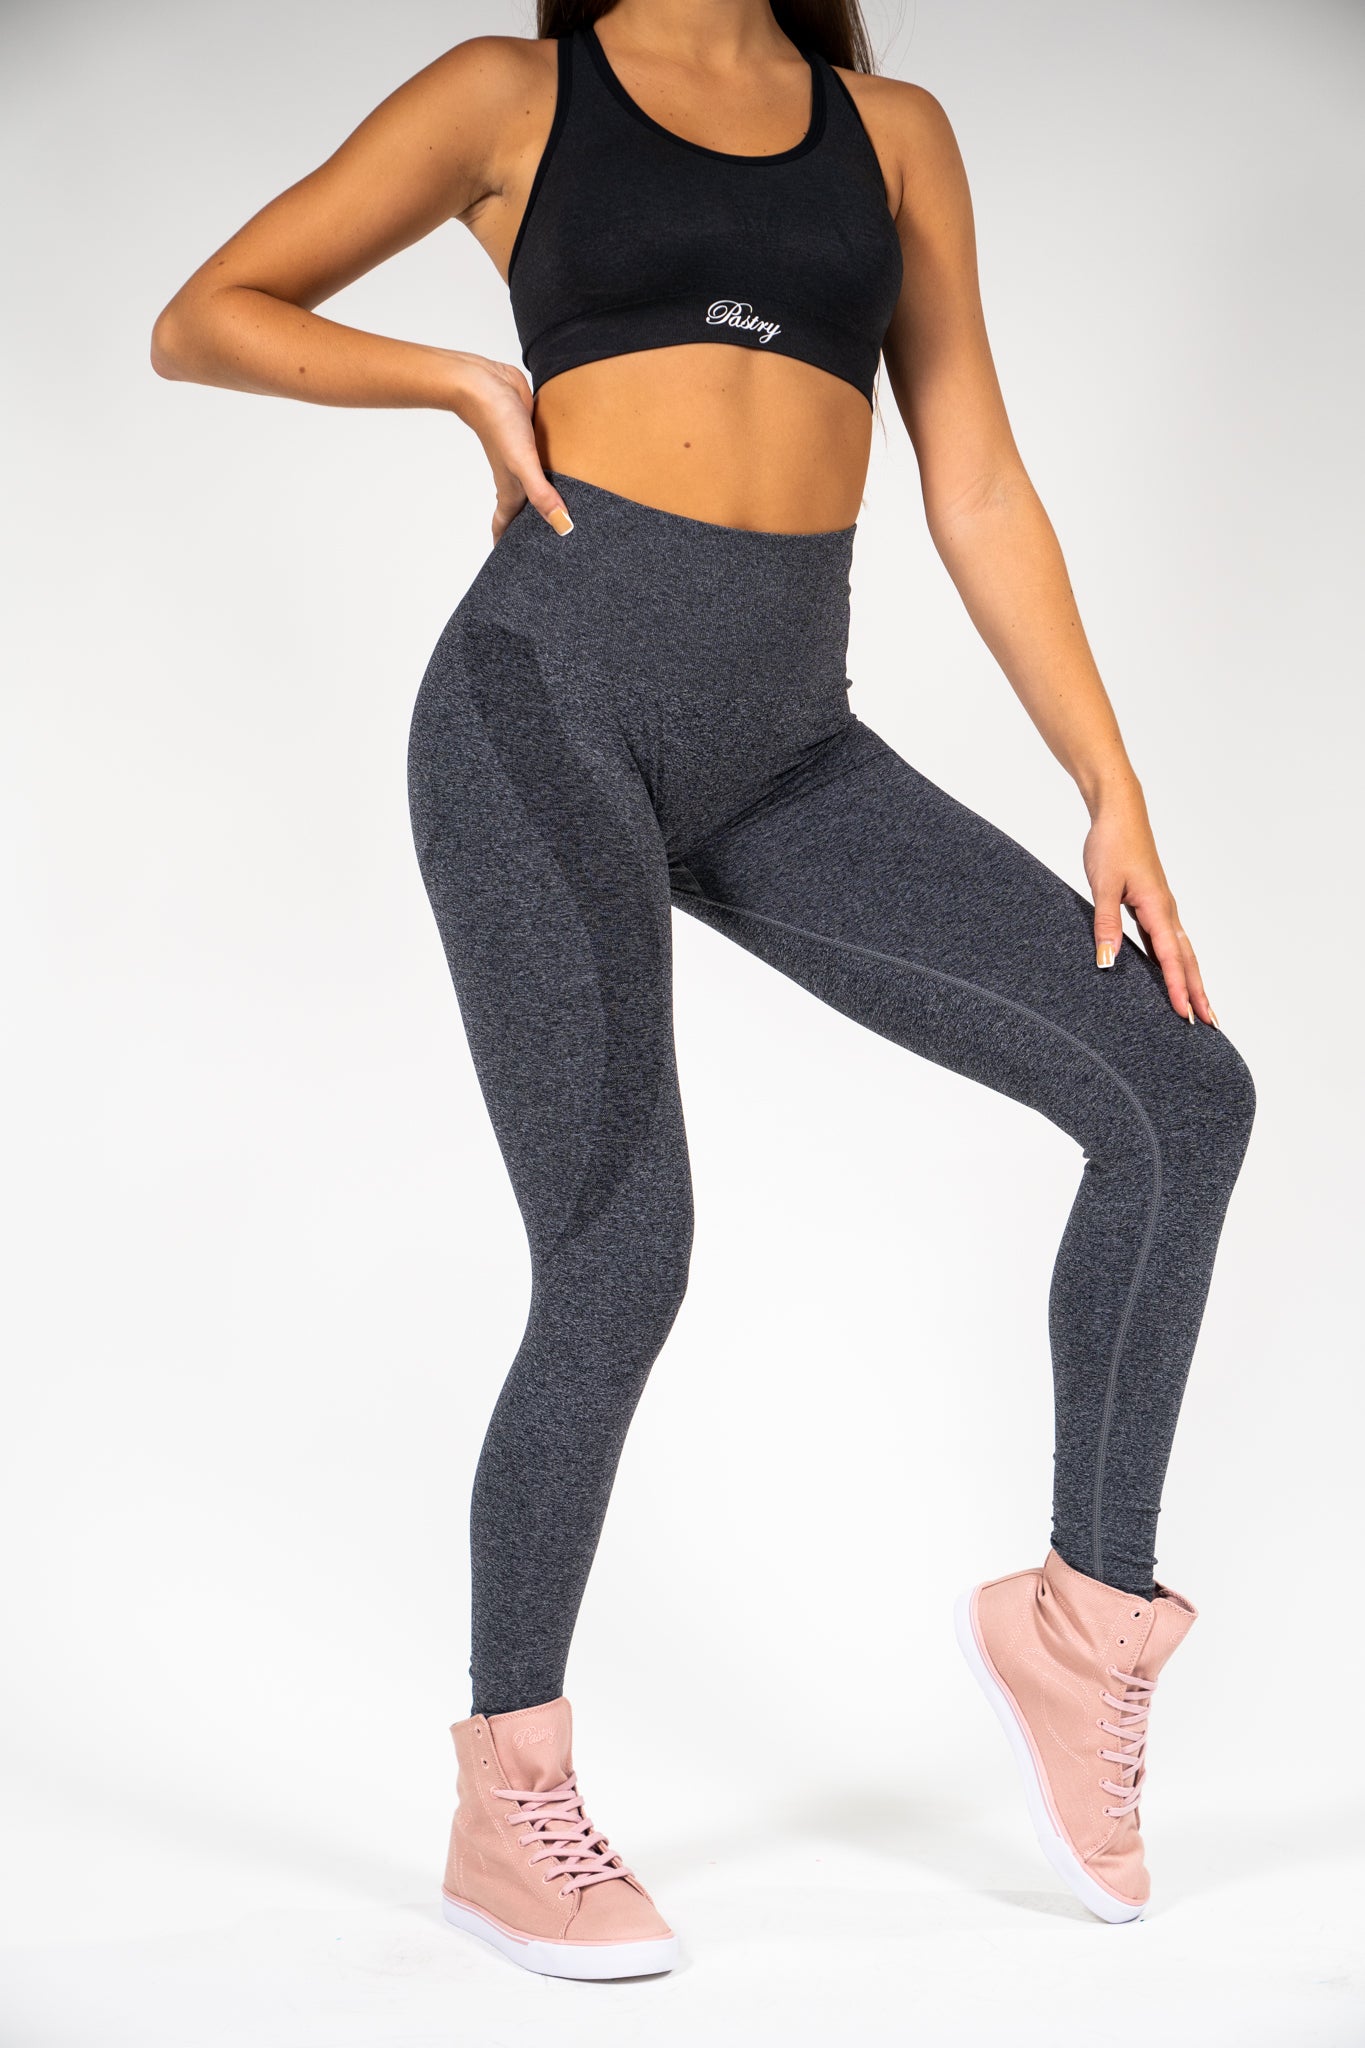 Woman wearing Pastry Seamless Leggings Black Speckled Marl front view